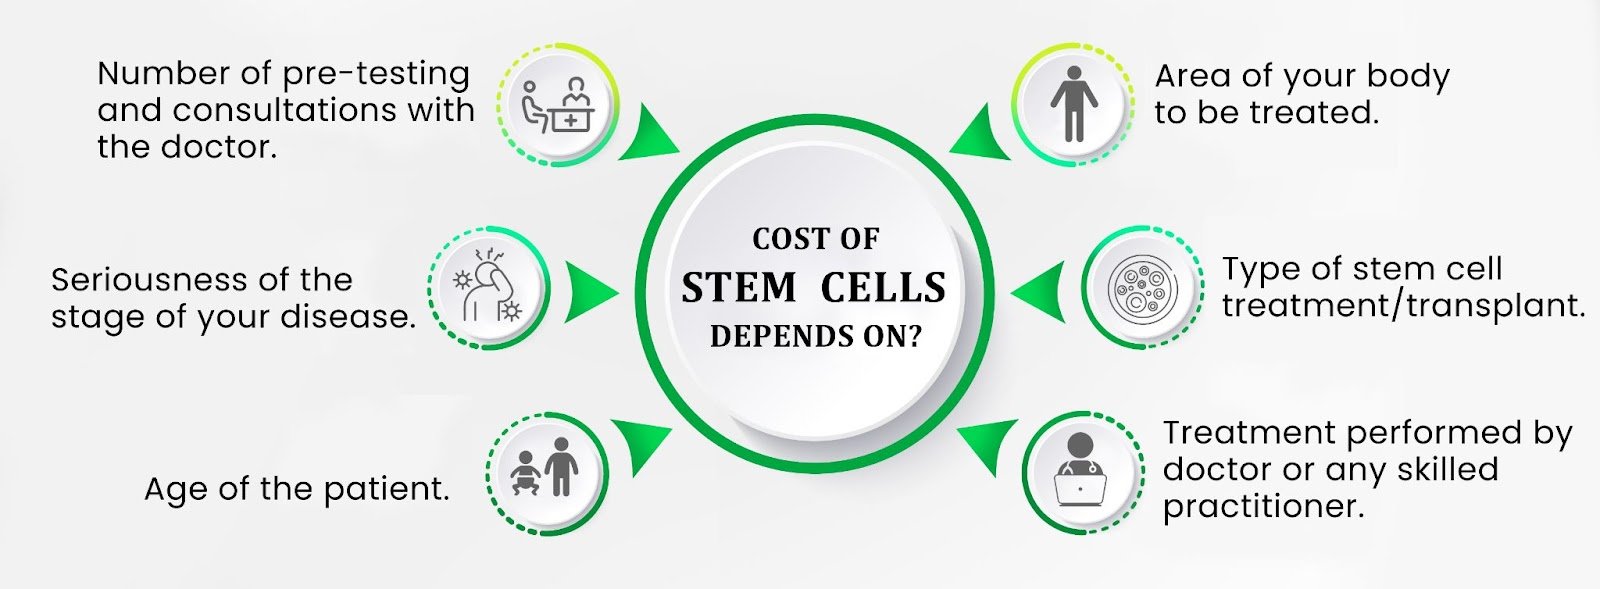 Factors Affecting Cost of Stem Cell Therapy